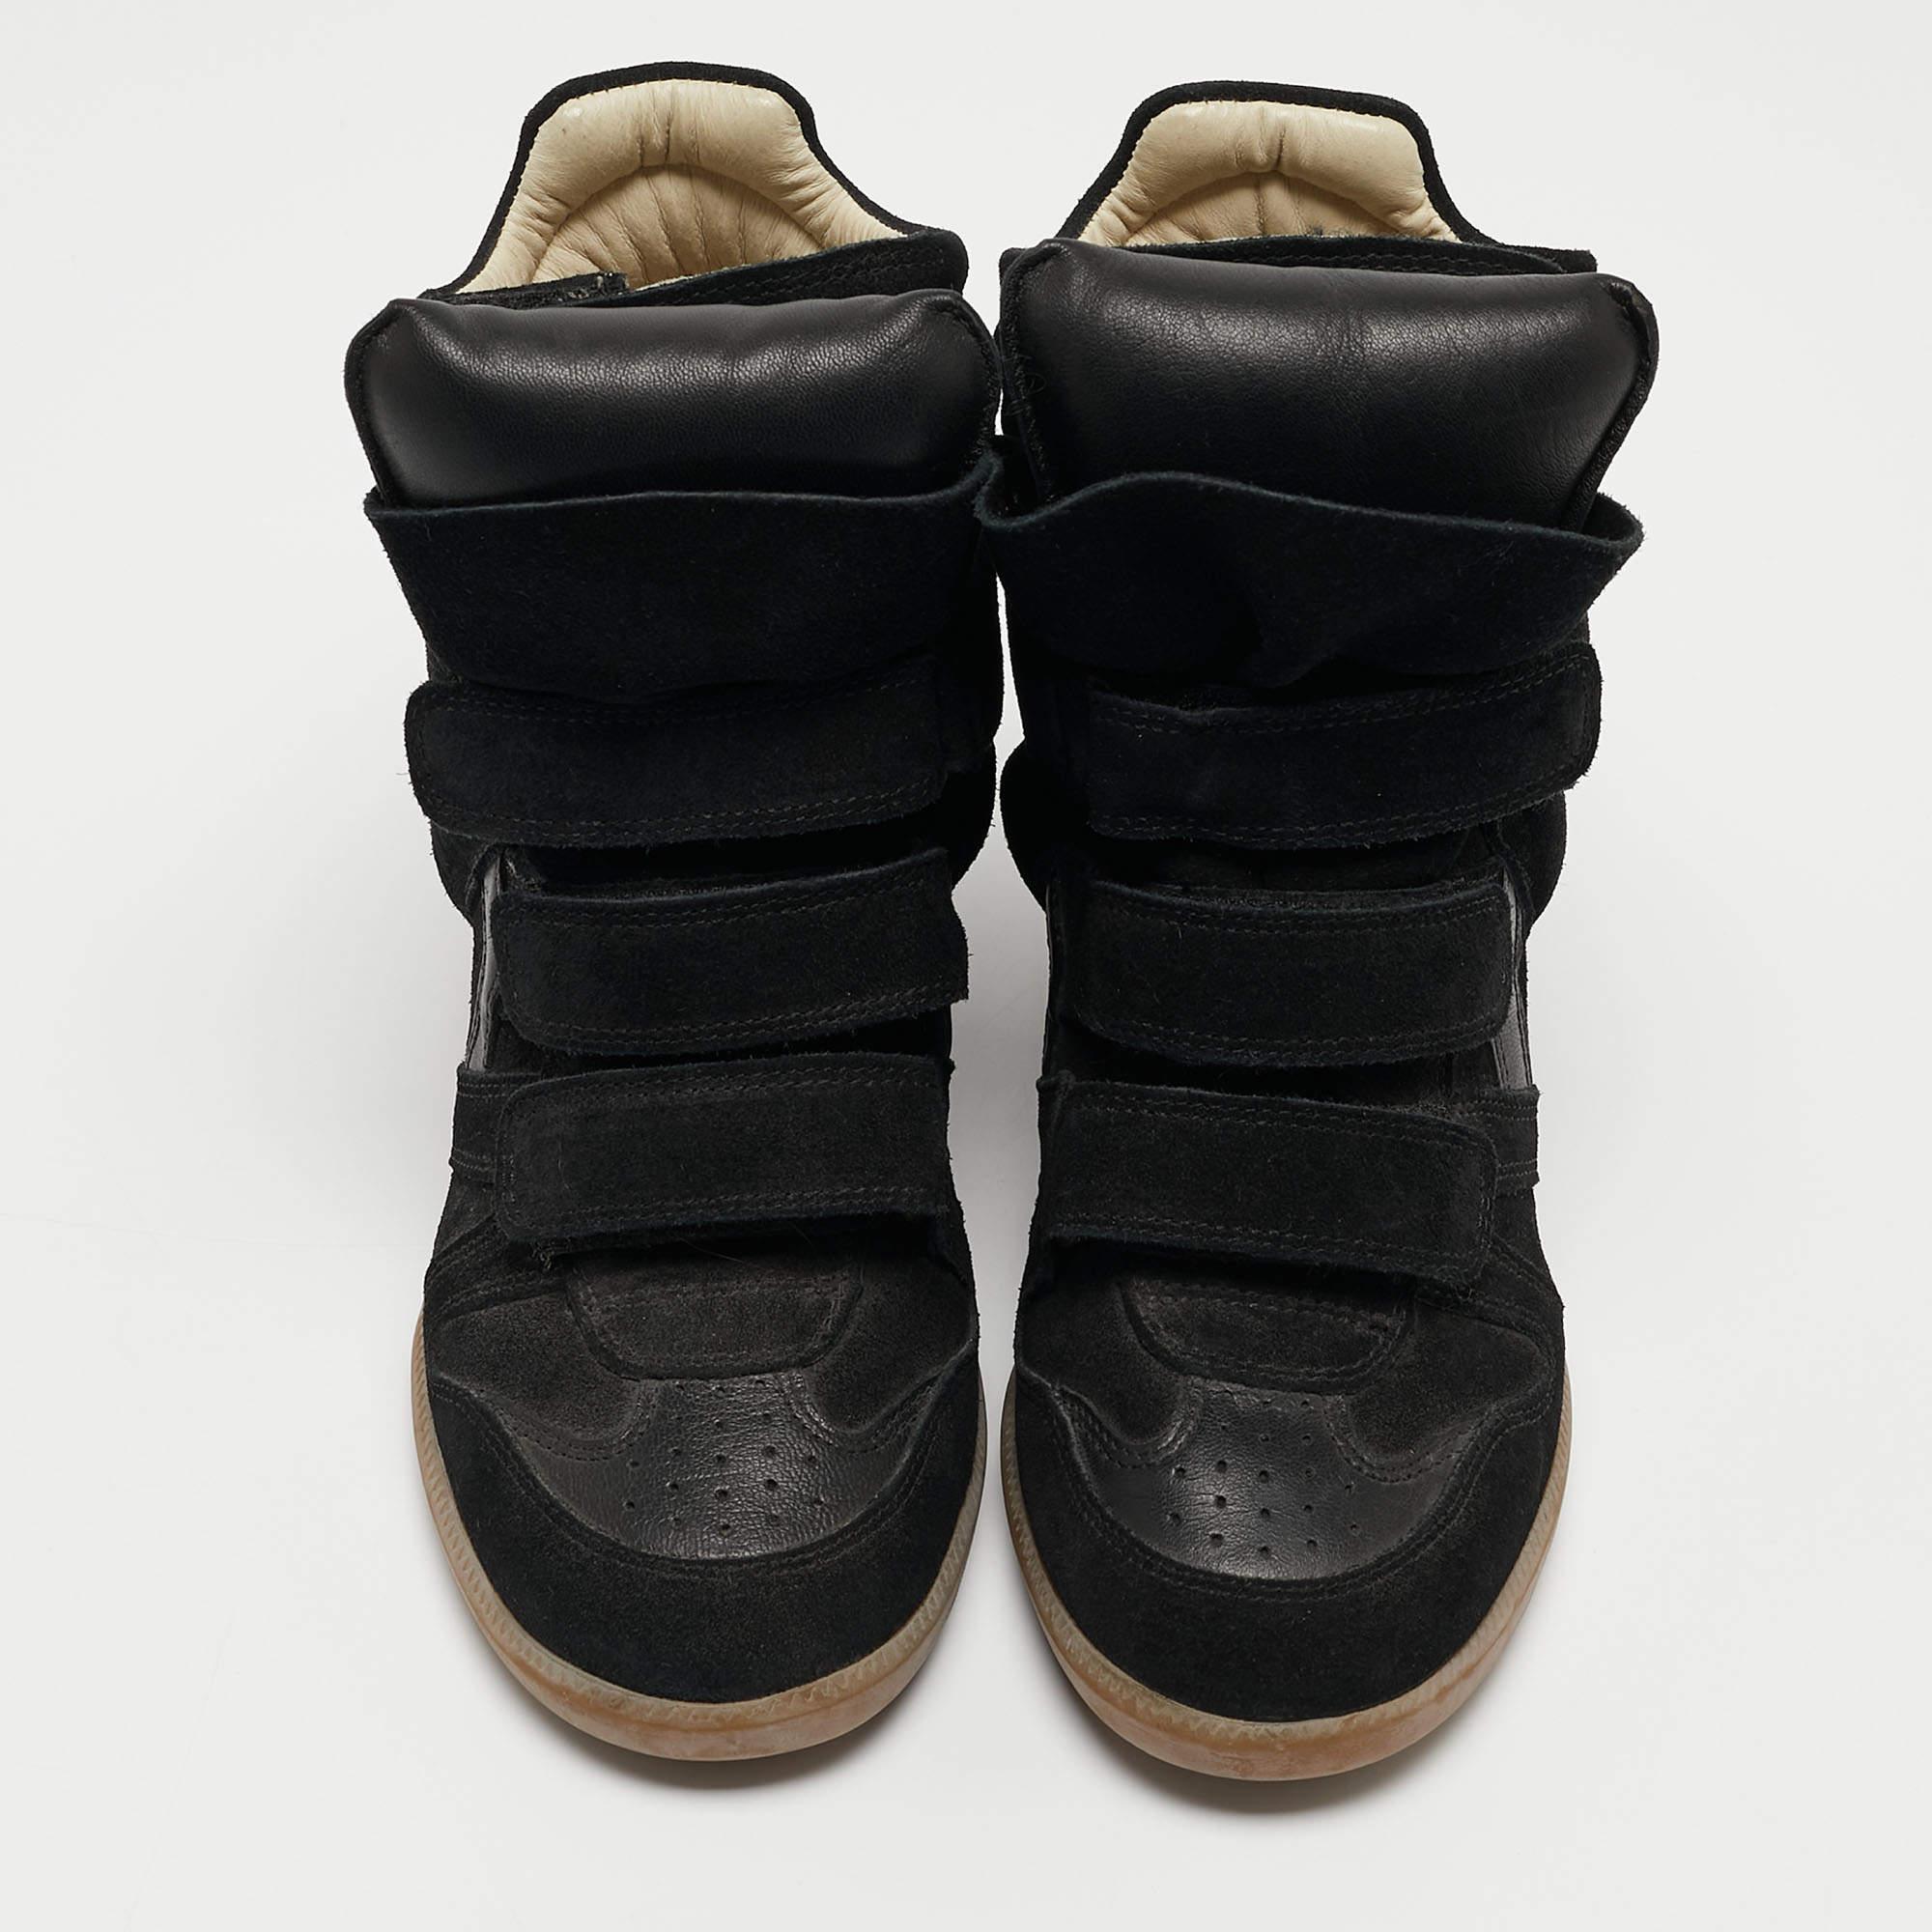 Isabel Marant Black Leather and Suede Wedge Sneakers Size 37 In Good Condition For Sale In Dubai, Al Qouz 2